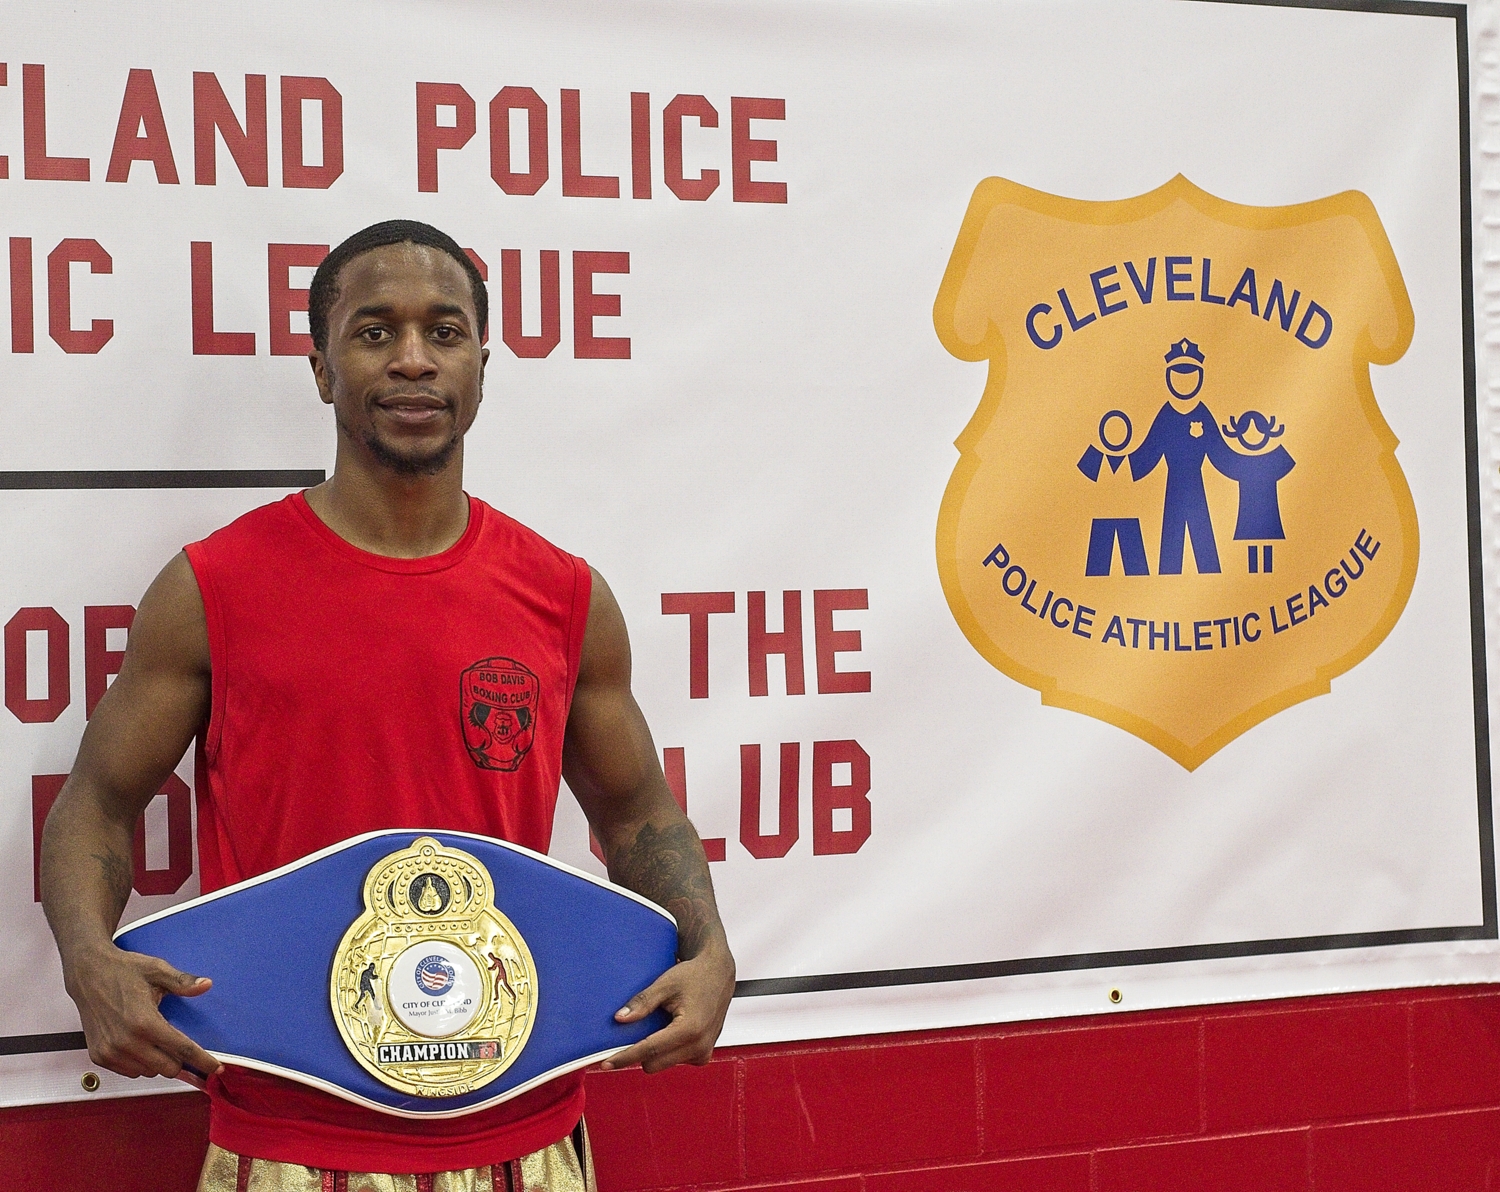 A young man displays his Champion belt while standing in front of the Cleveland Police Athletic League logo